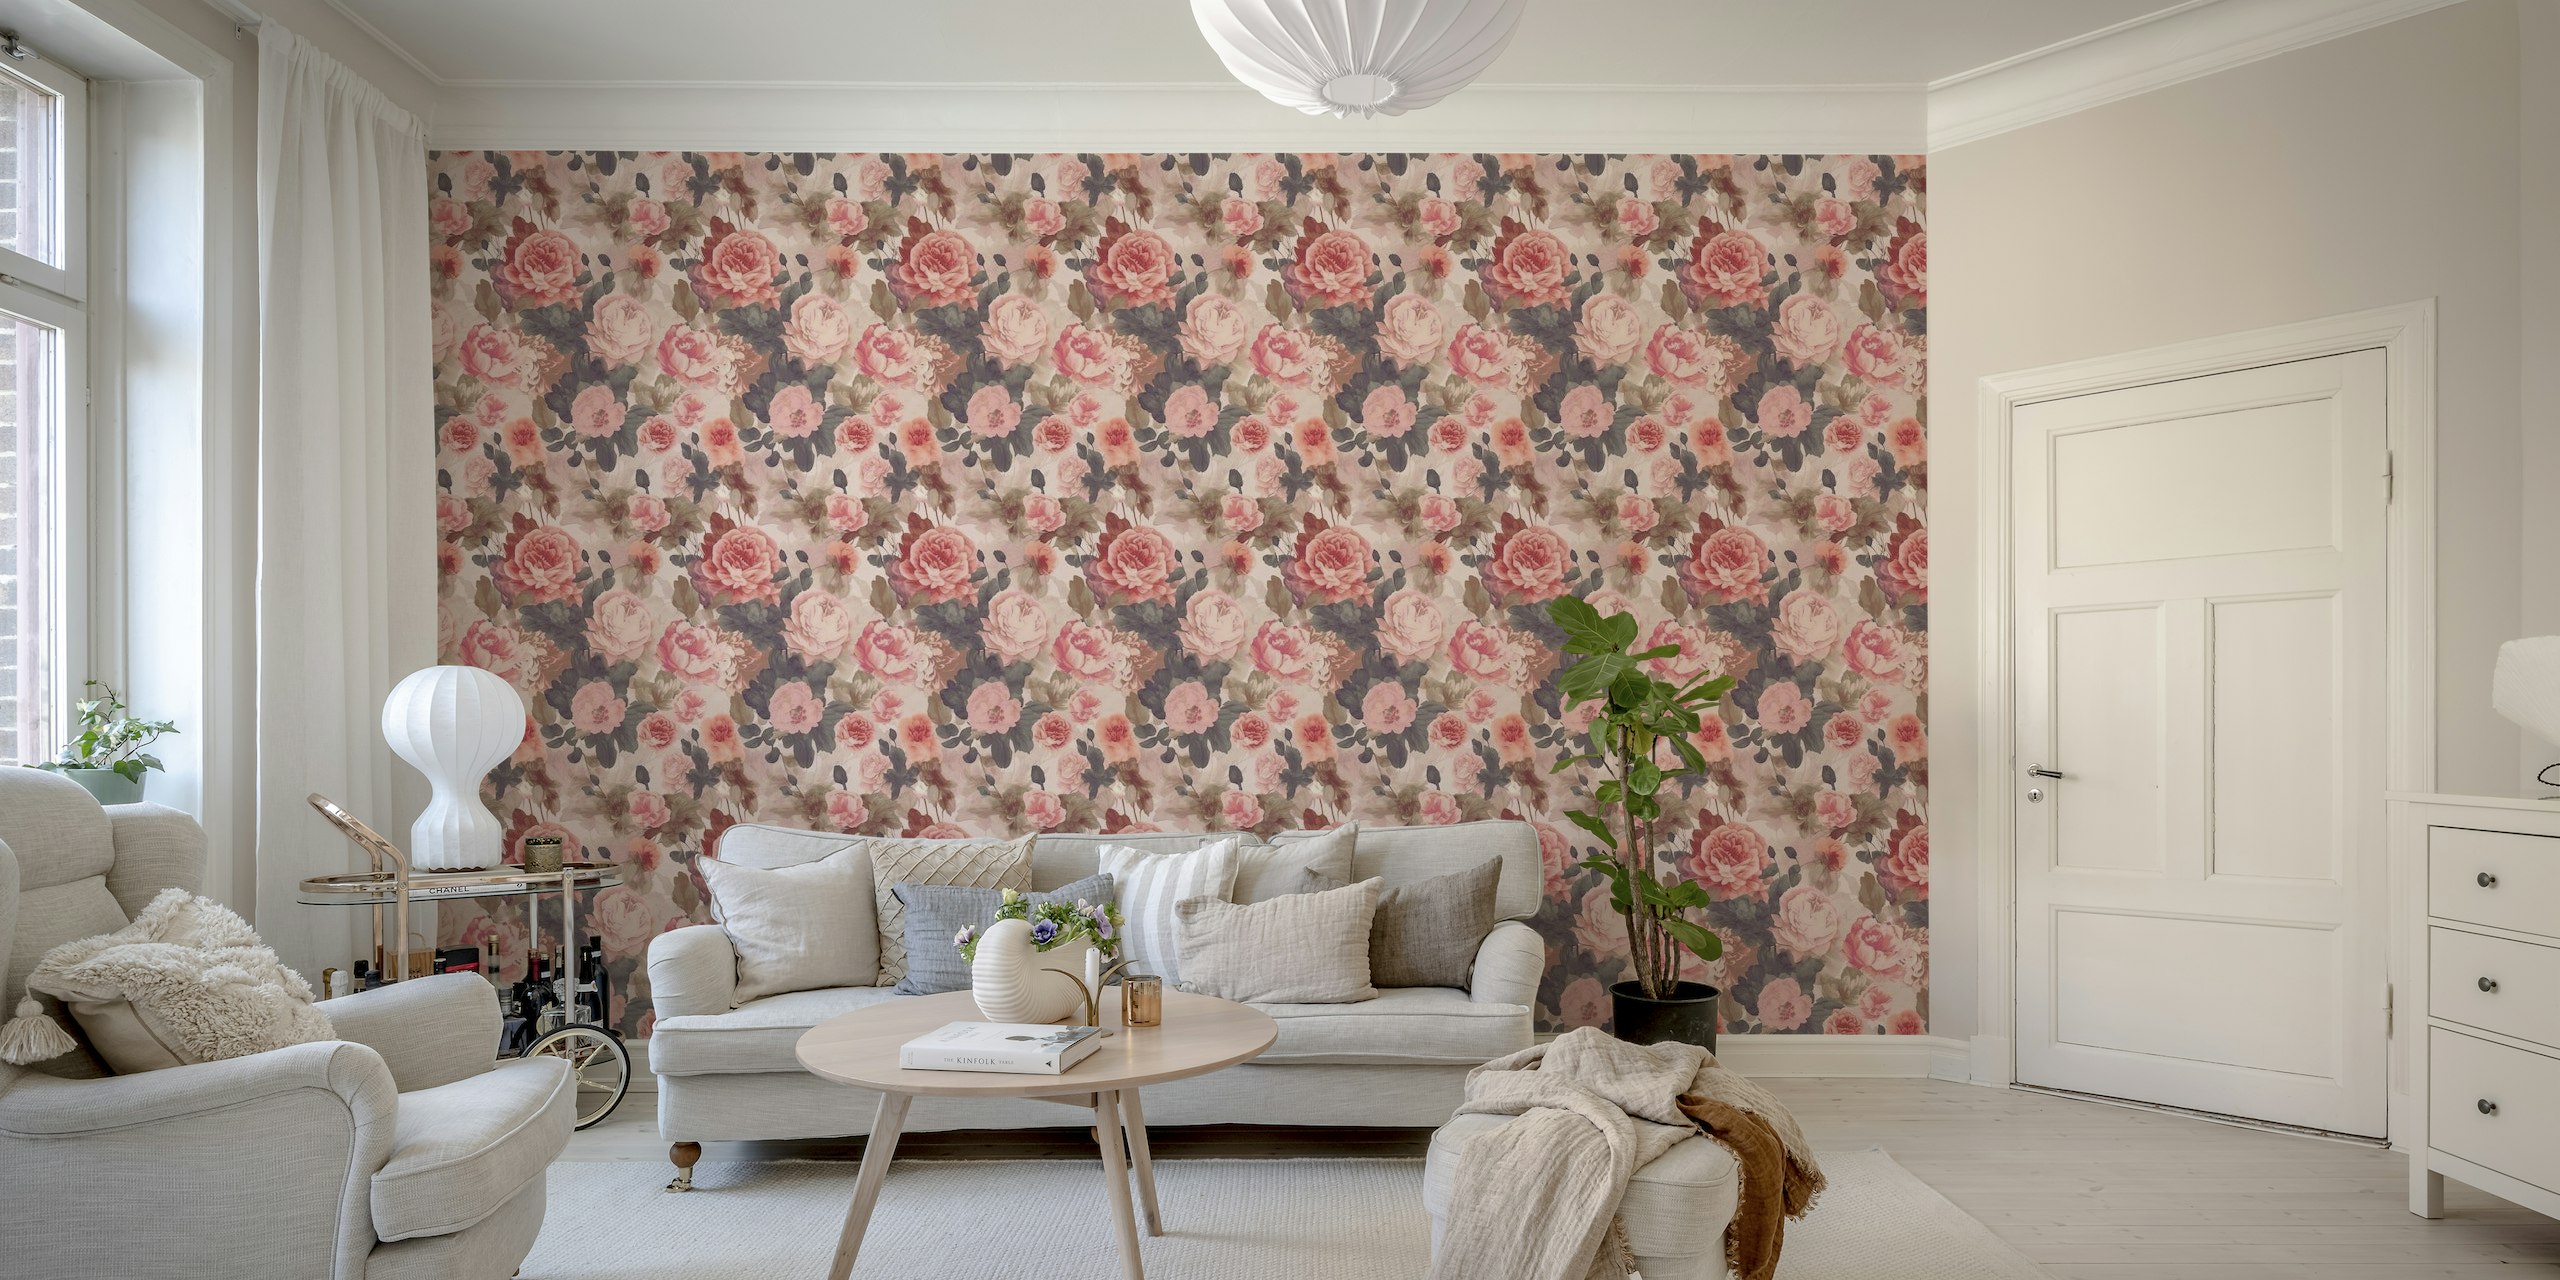 Baroque Roses Floral Nostalgia Design In Moody Pink Colors behang